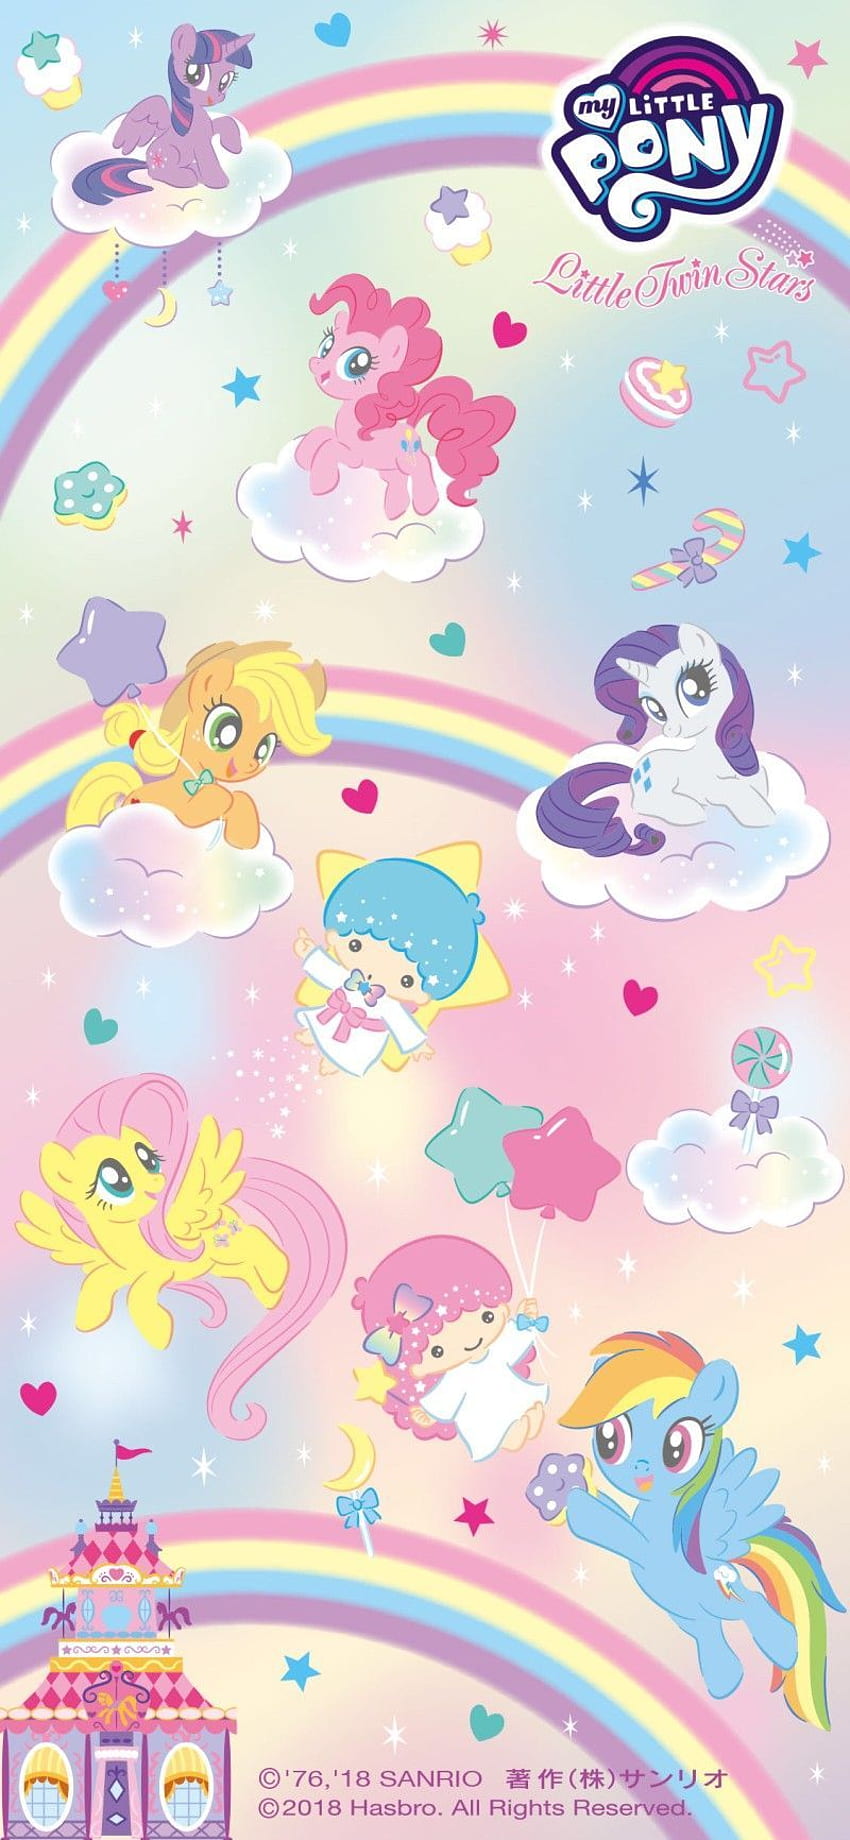 Pin by Lorena on wallpapers | My little pony wallpaper, Unicorn wallpaper,  Little pony